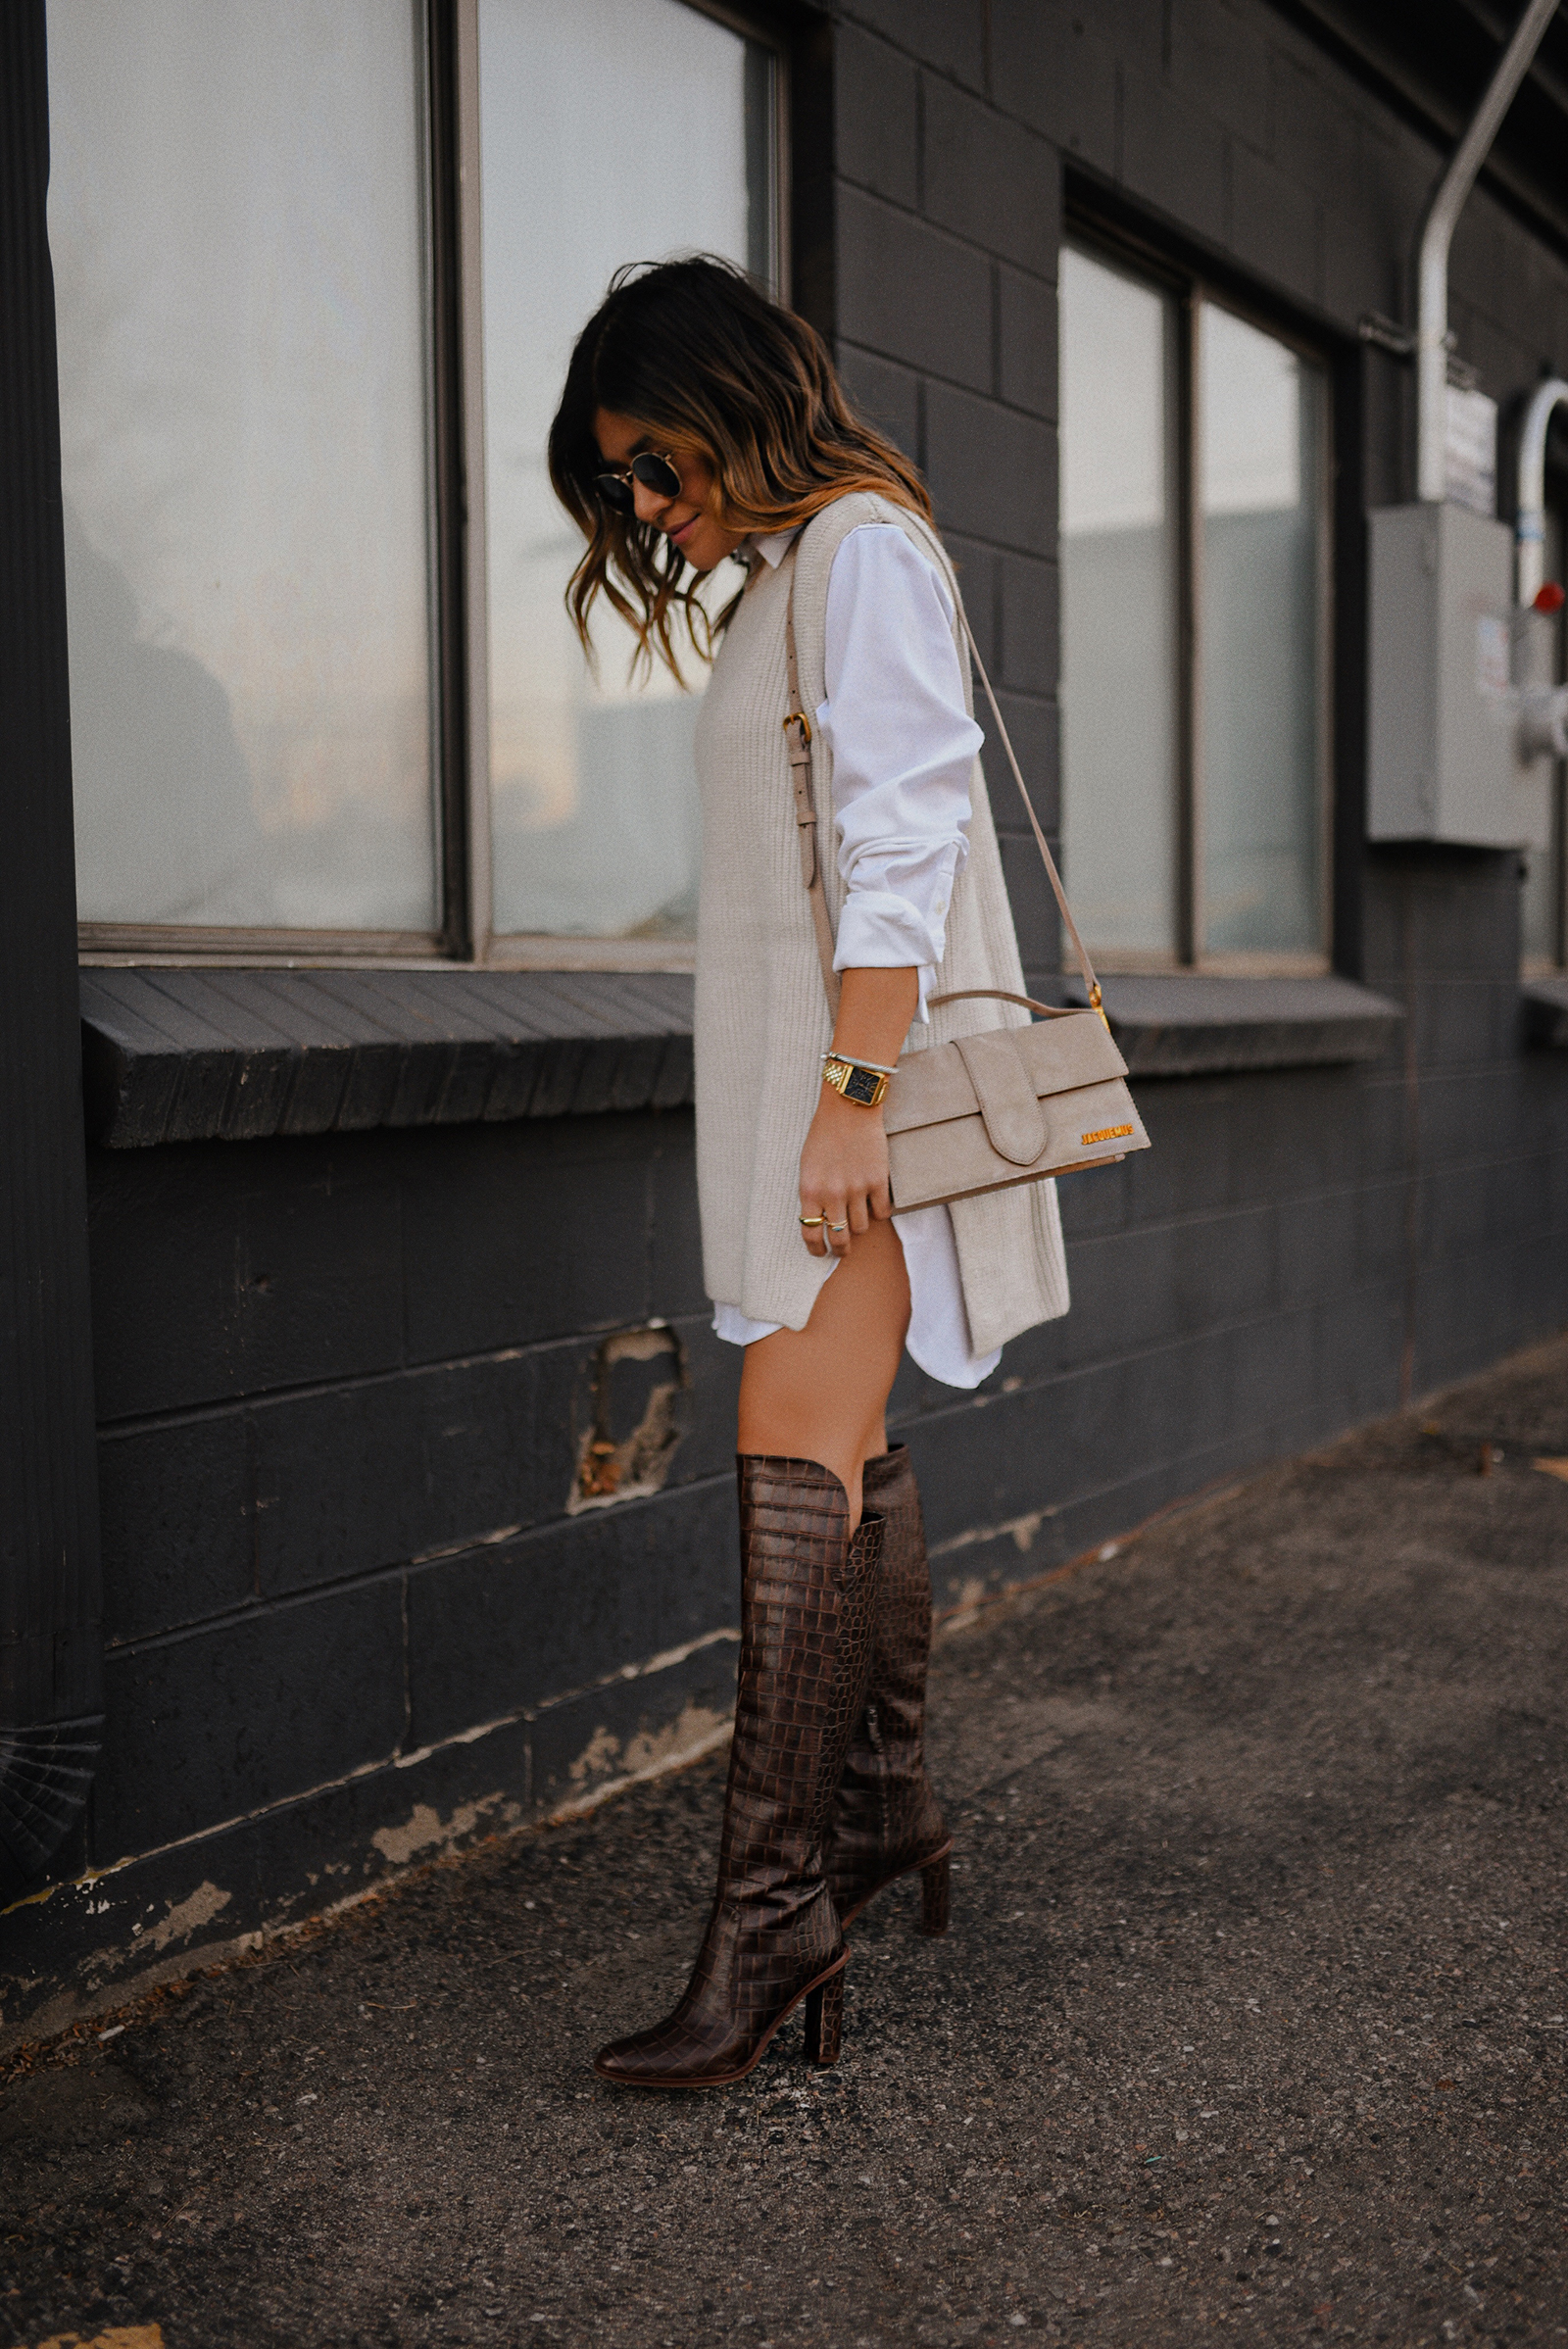 CAROLINA HELLAL FROM CHIC TALK WEARING A SHIRT DRESS AND A KNIT VEST WITH CROC BROWN BOOTS FROM VINCE CAMUTO